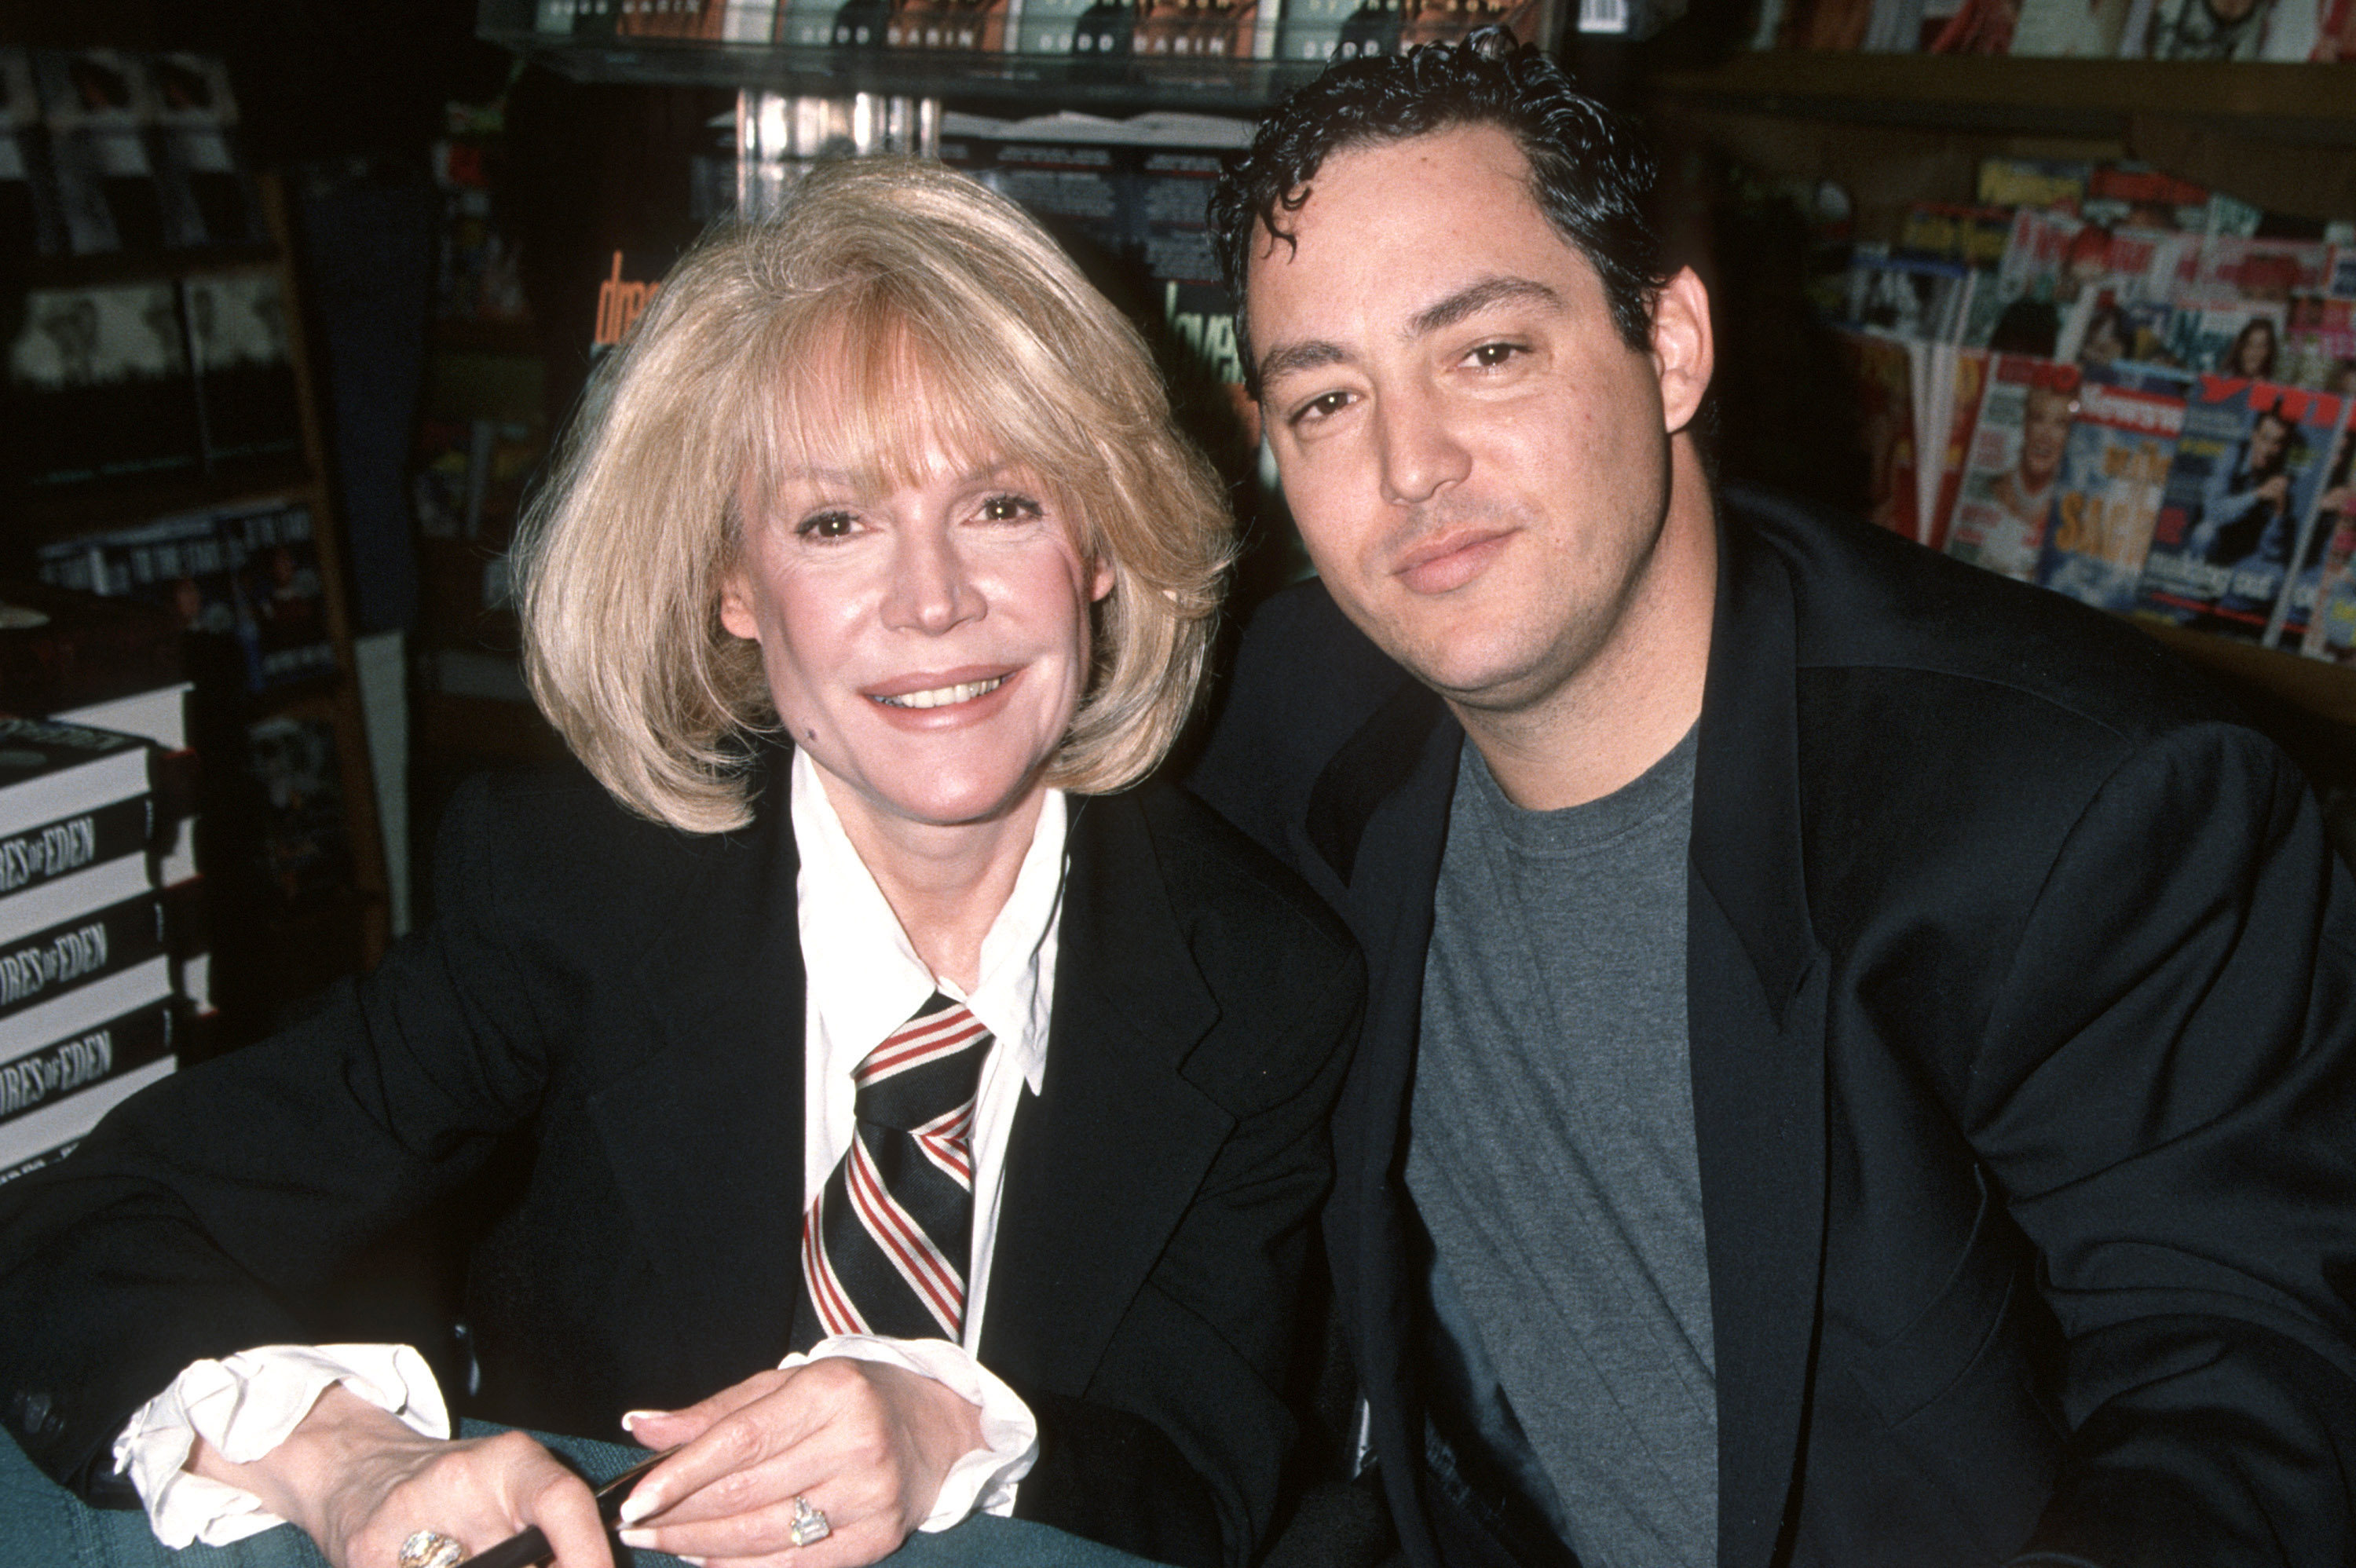 Sandra Dee and Dodd Mitchell Darin at Dodd's book signing in West Hollywood in 1994 | Source: Getty Images